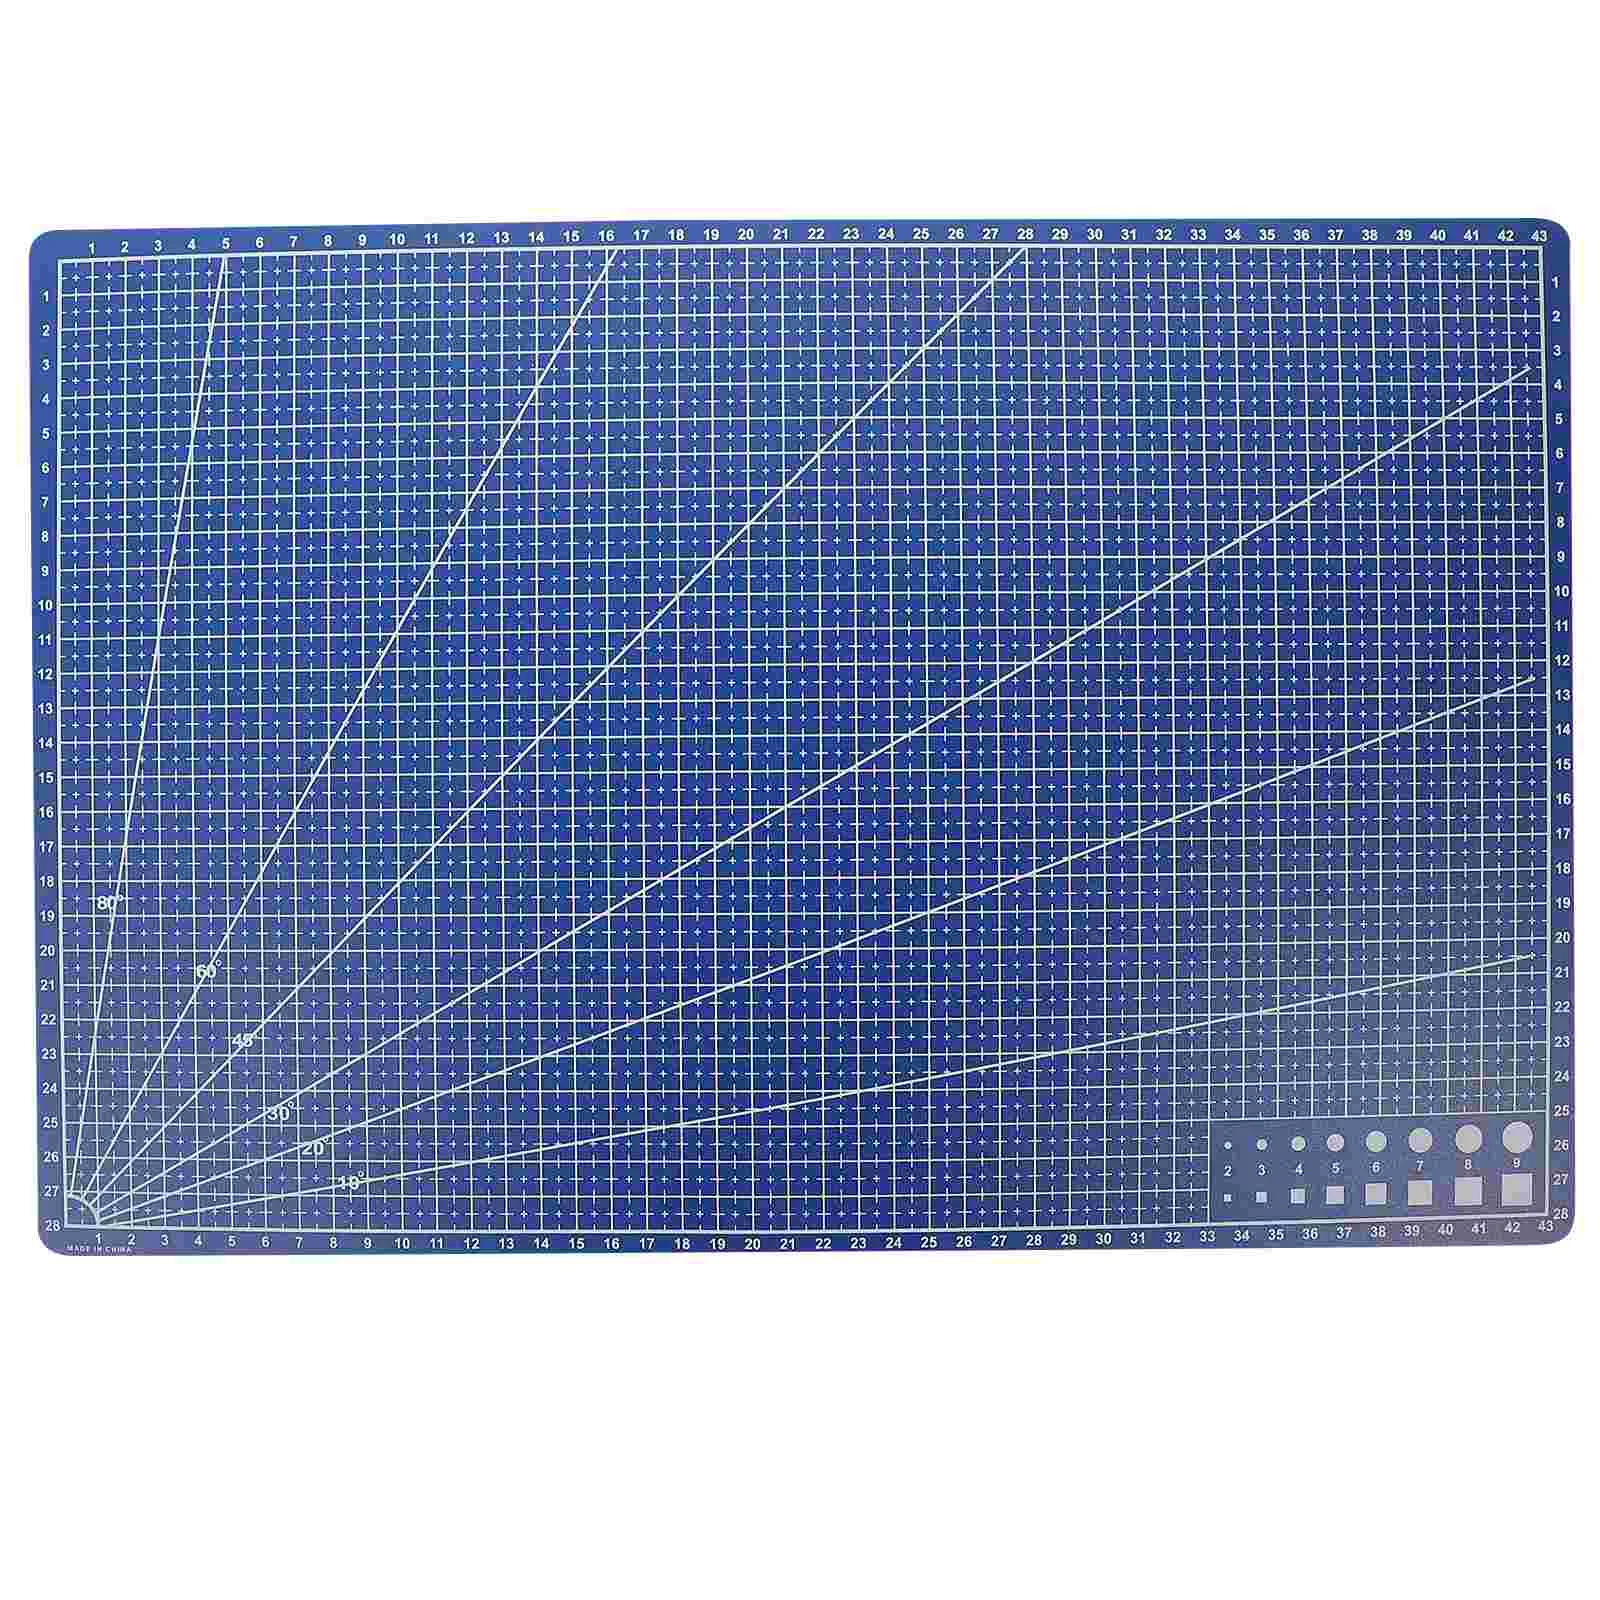 

Cutting Mat Mats Board Rotary Self Craft Sewing Pad Engraving Professional Scrapbooking X Pvc Sided Double Fabric Pp Quilting